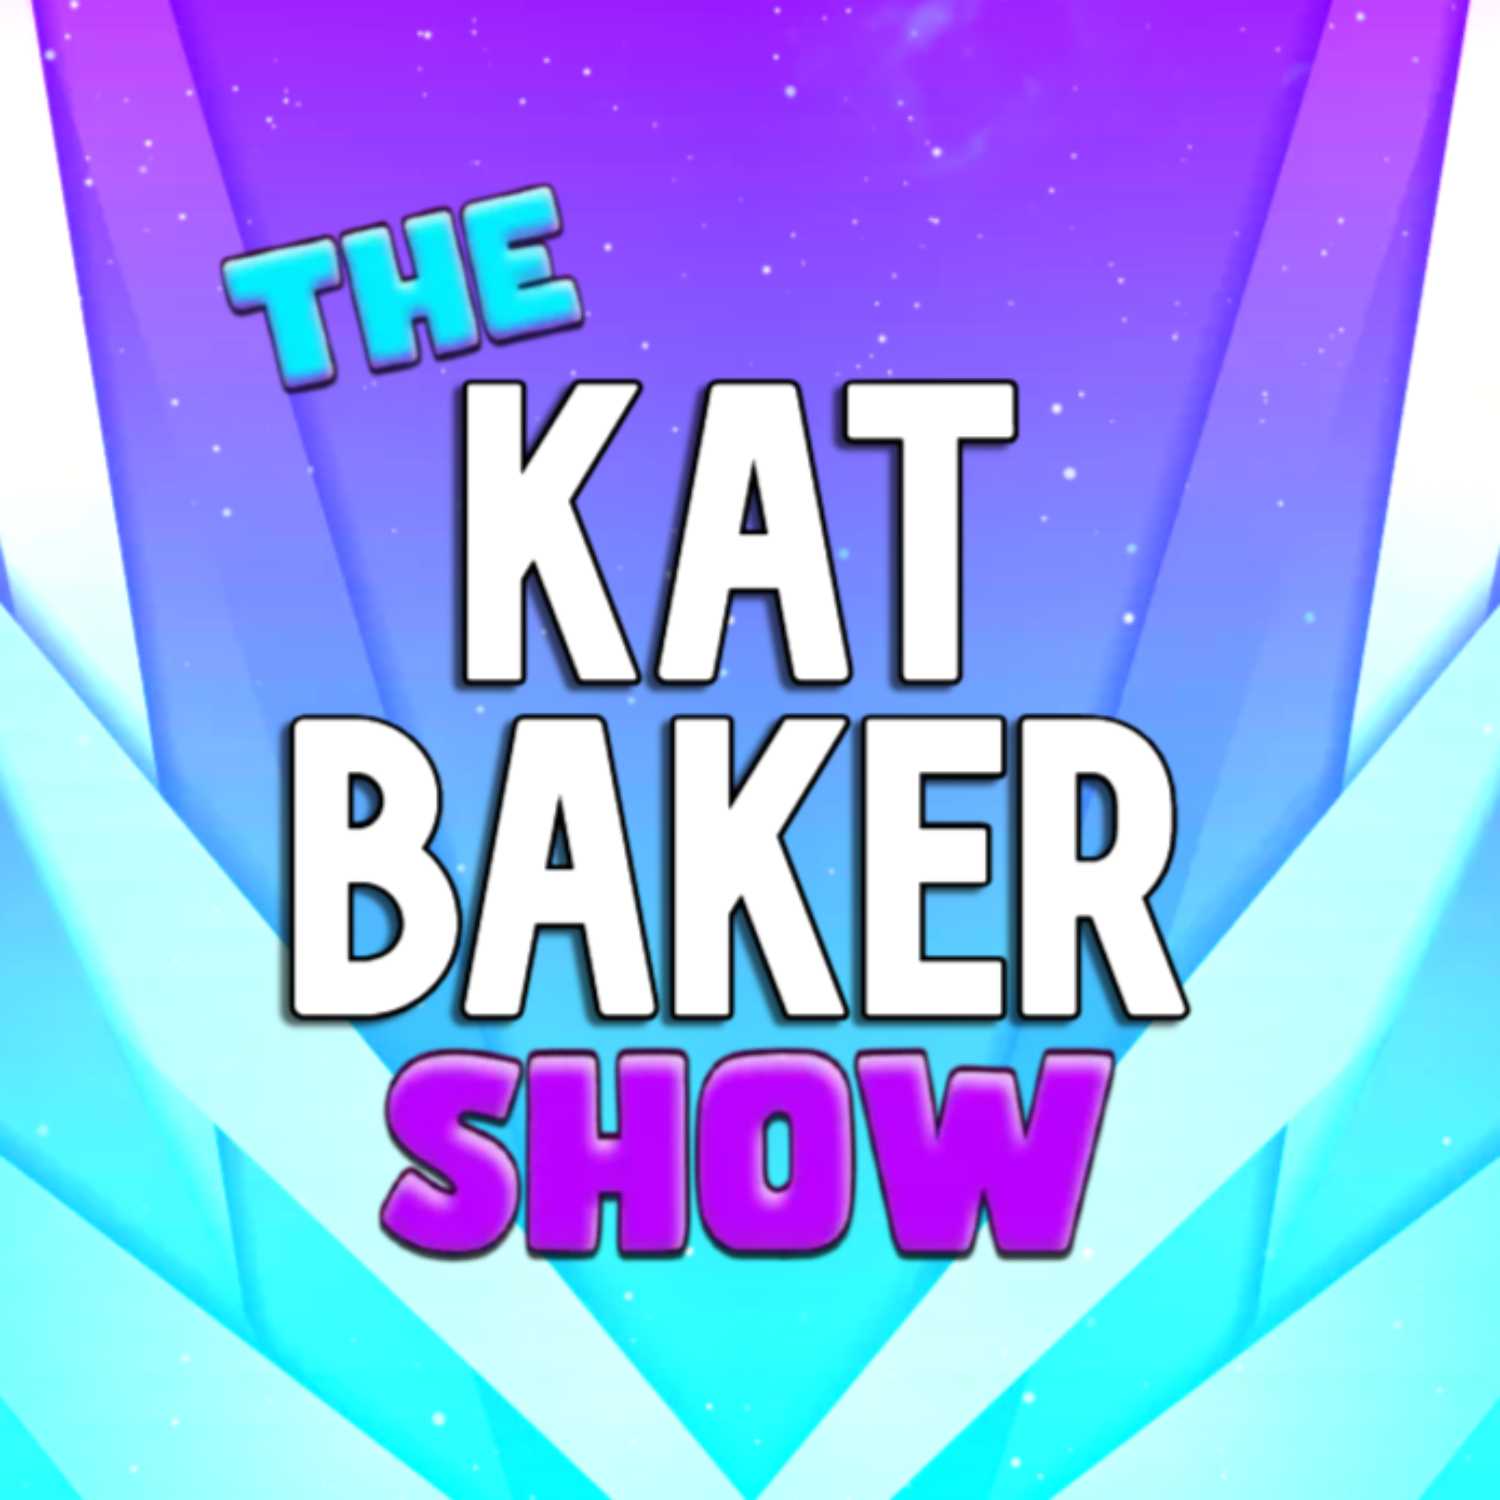 Are you single because of your knob size? and finding the right autistic polycule for you! The Kat Baker Show ep.11